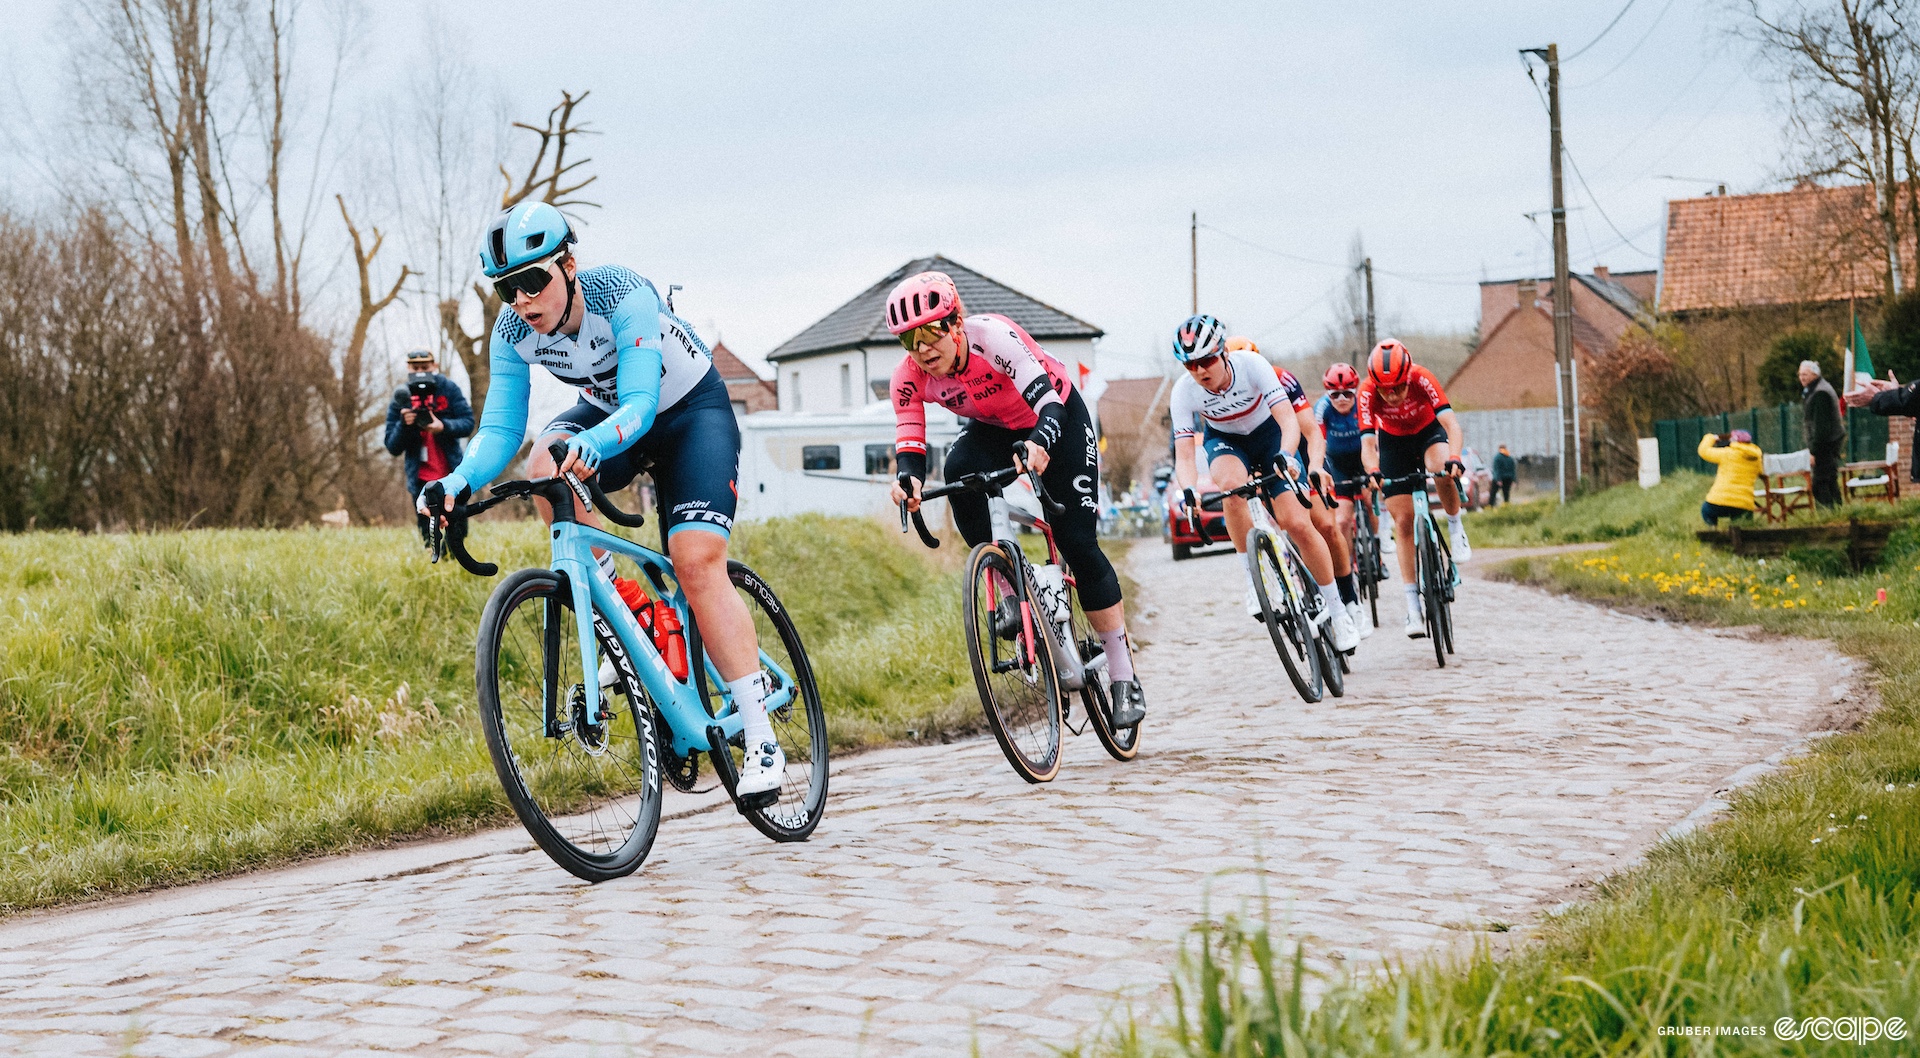 Alison Jackson rides the cobbles i the early break at the 2023 Paris-Roubaix. Lisa Klein from Trek-Segafredo is in front of her.